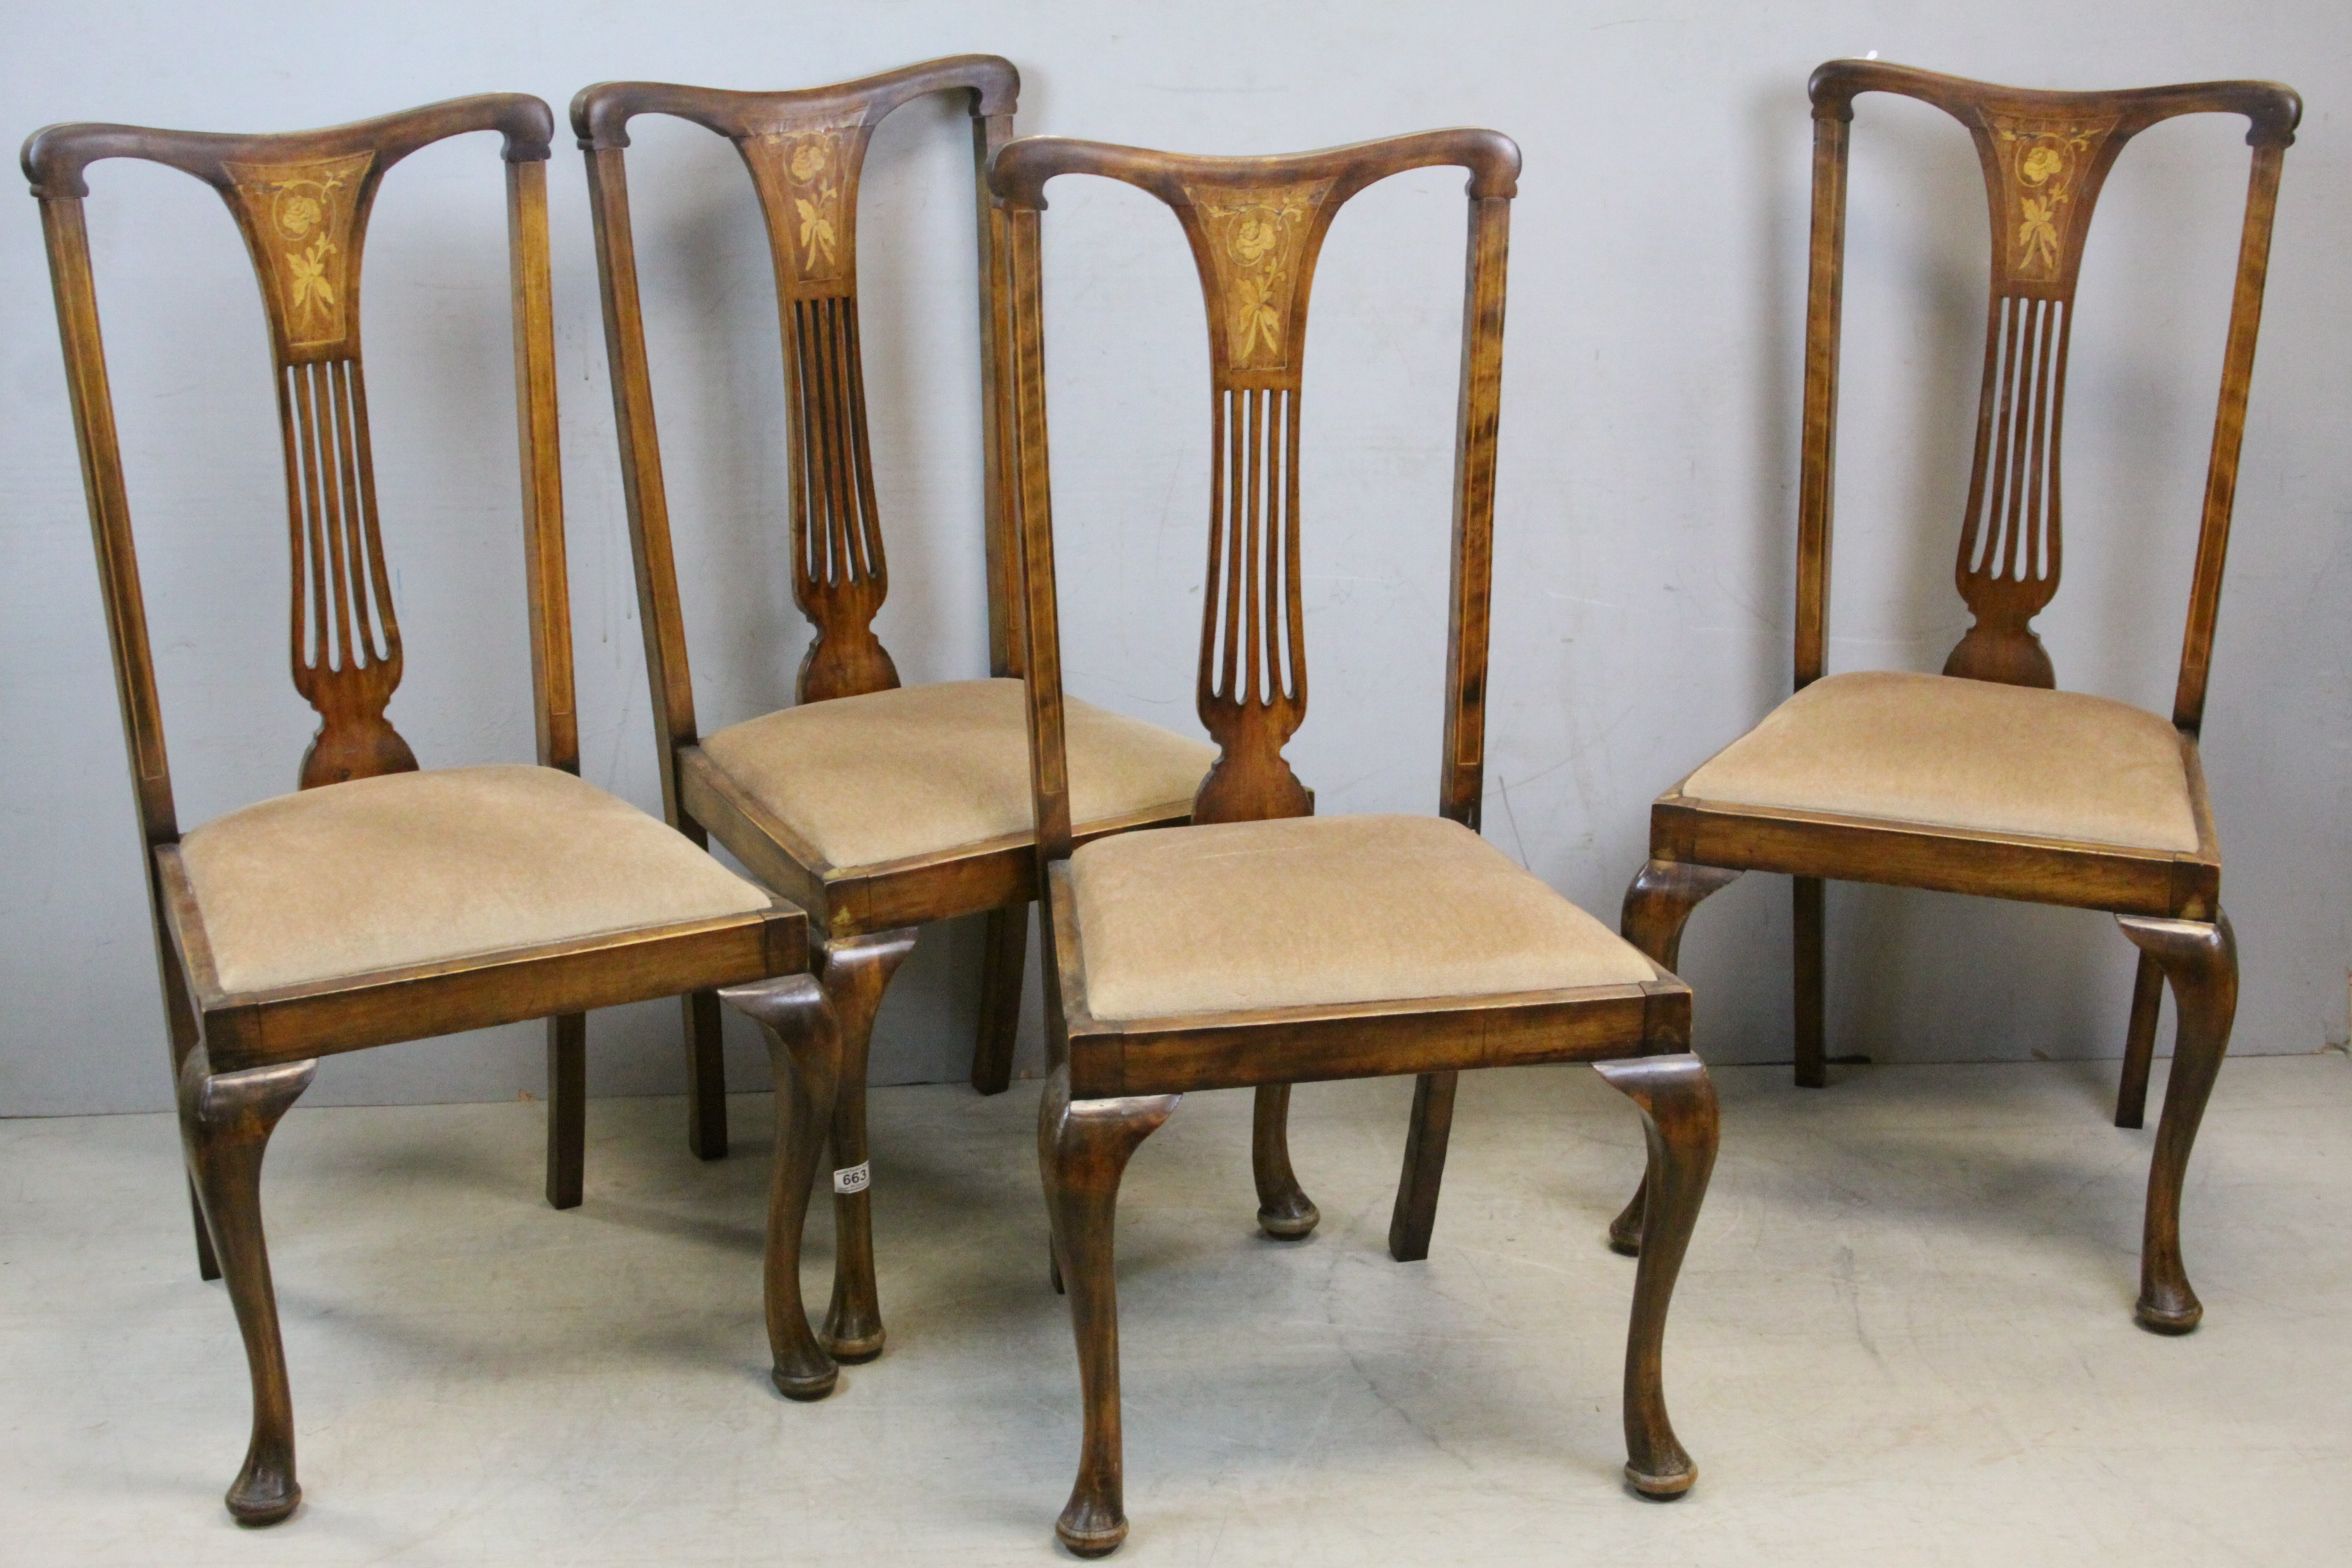 Set of Four Early 20th century Dining Chairs with Floral Inlaid and Pierced Splats, Drop in Seats